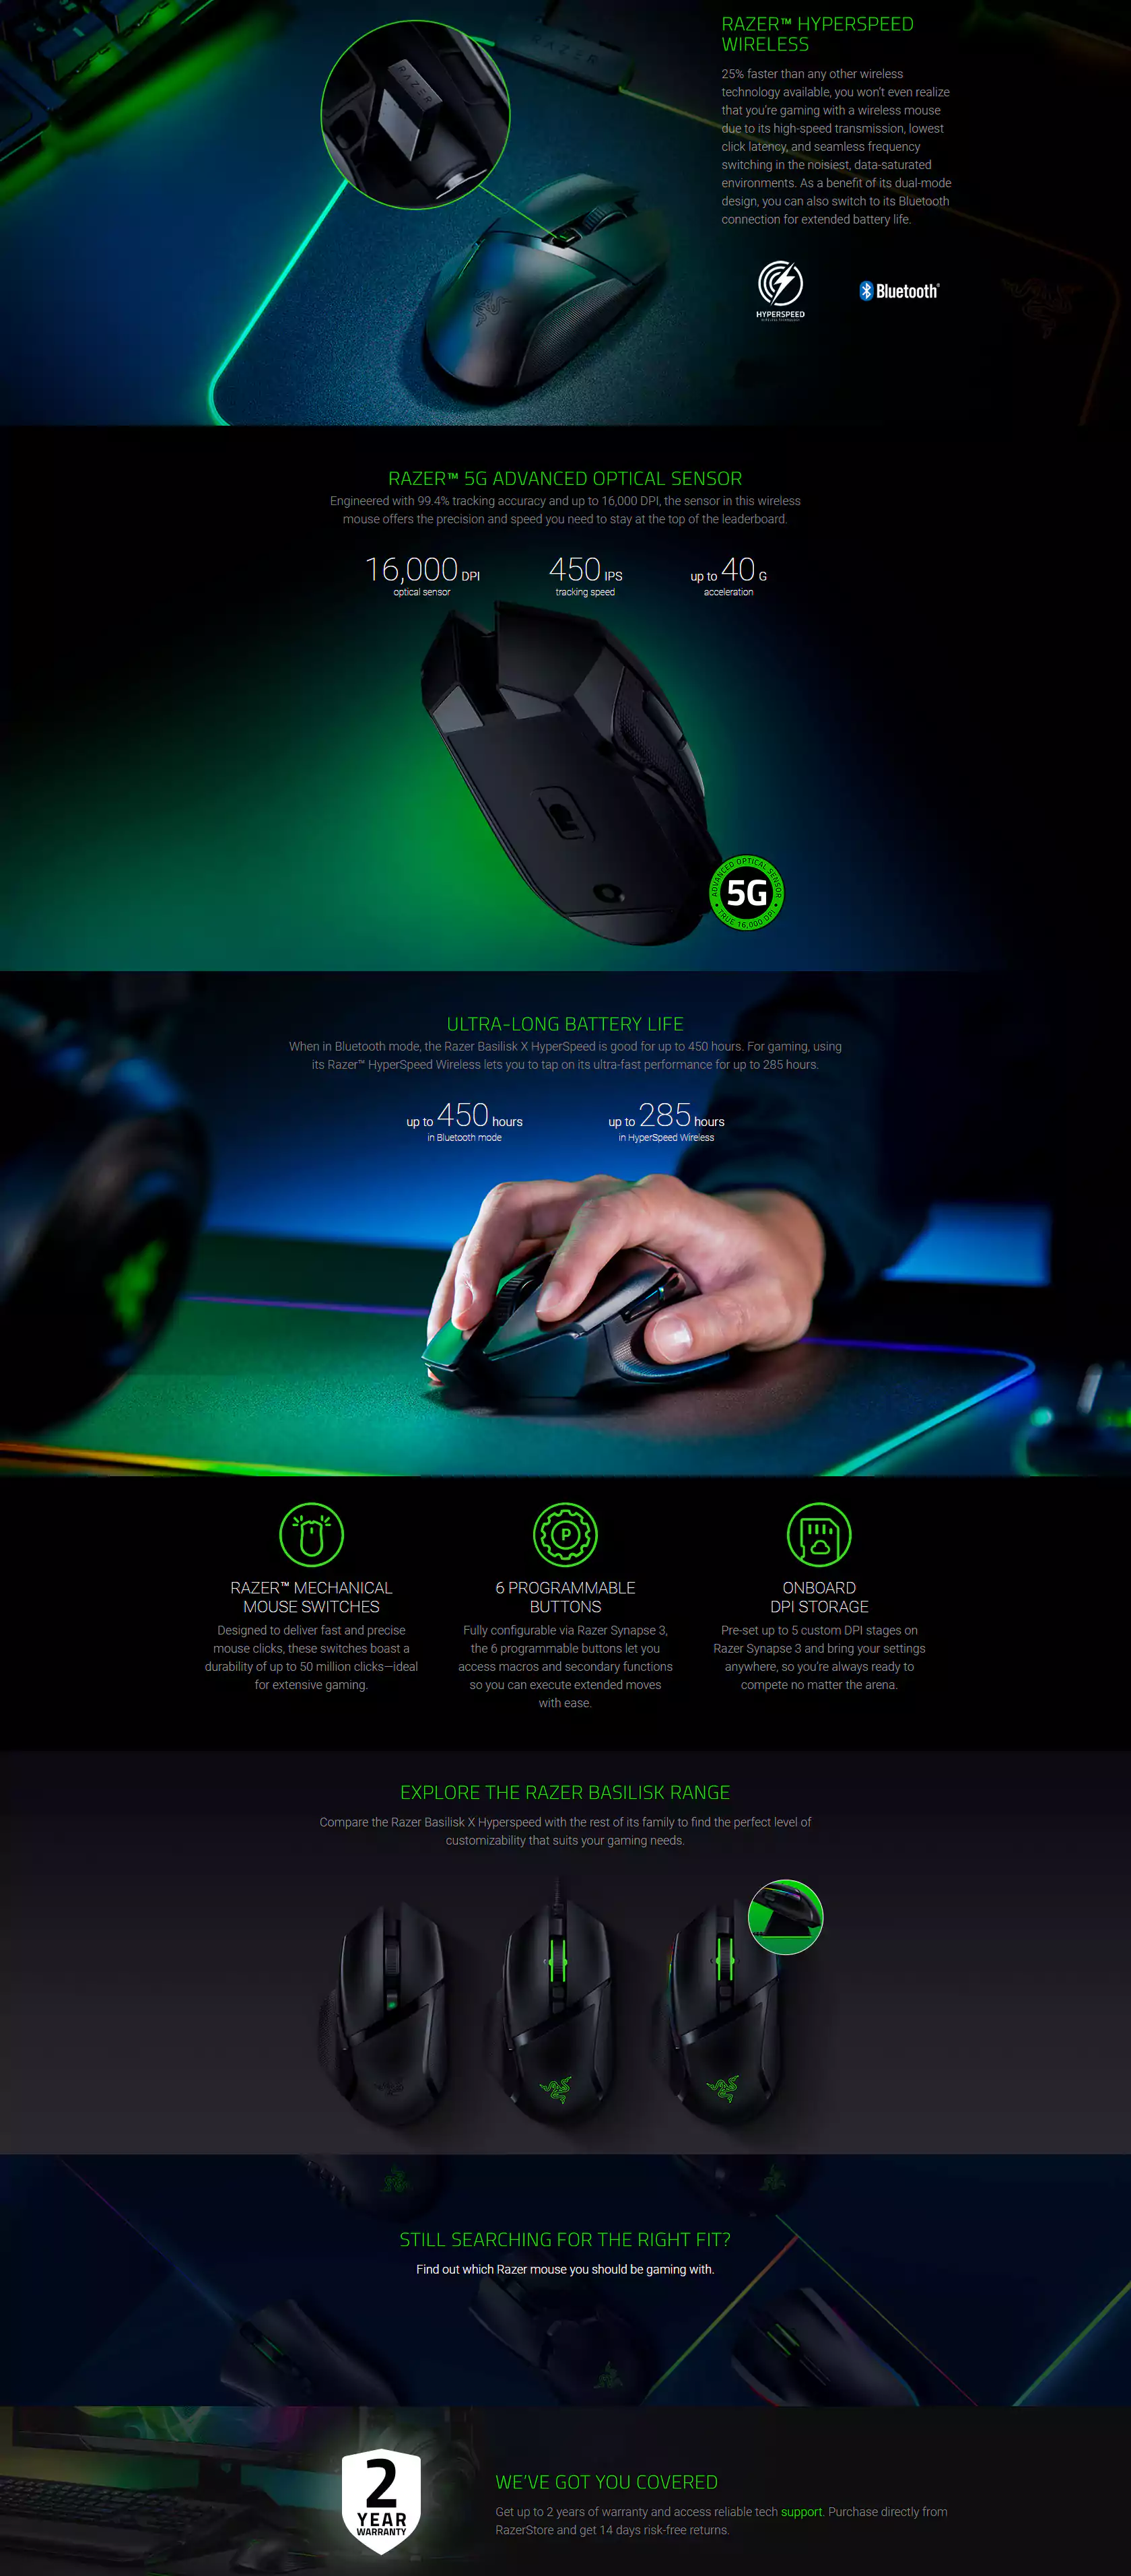 Razer Basilisk X HyperSpeed Wireless Gaming Mouse for PC, 6